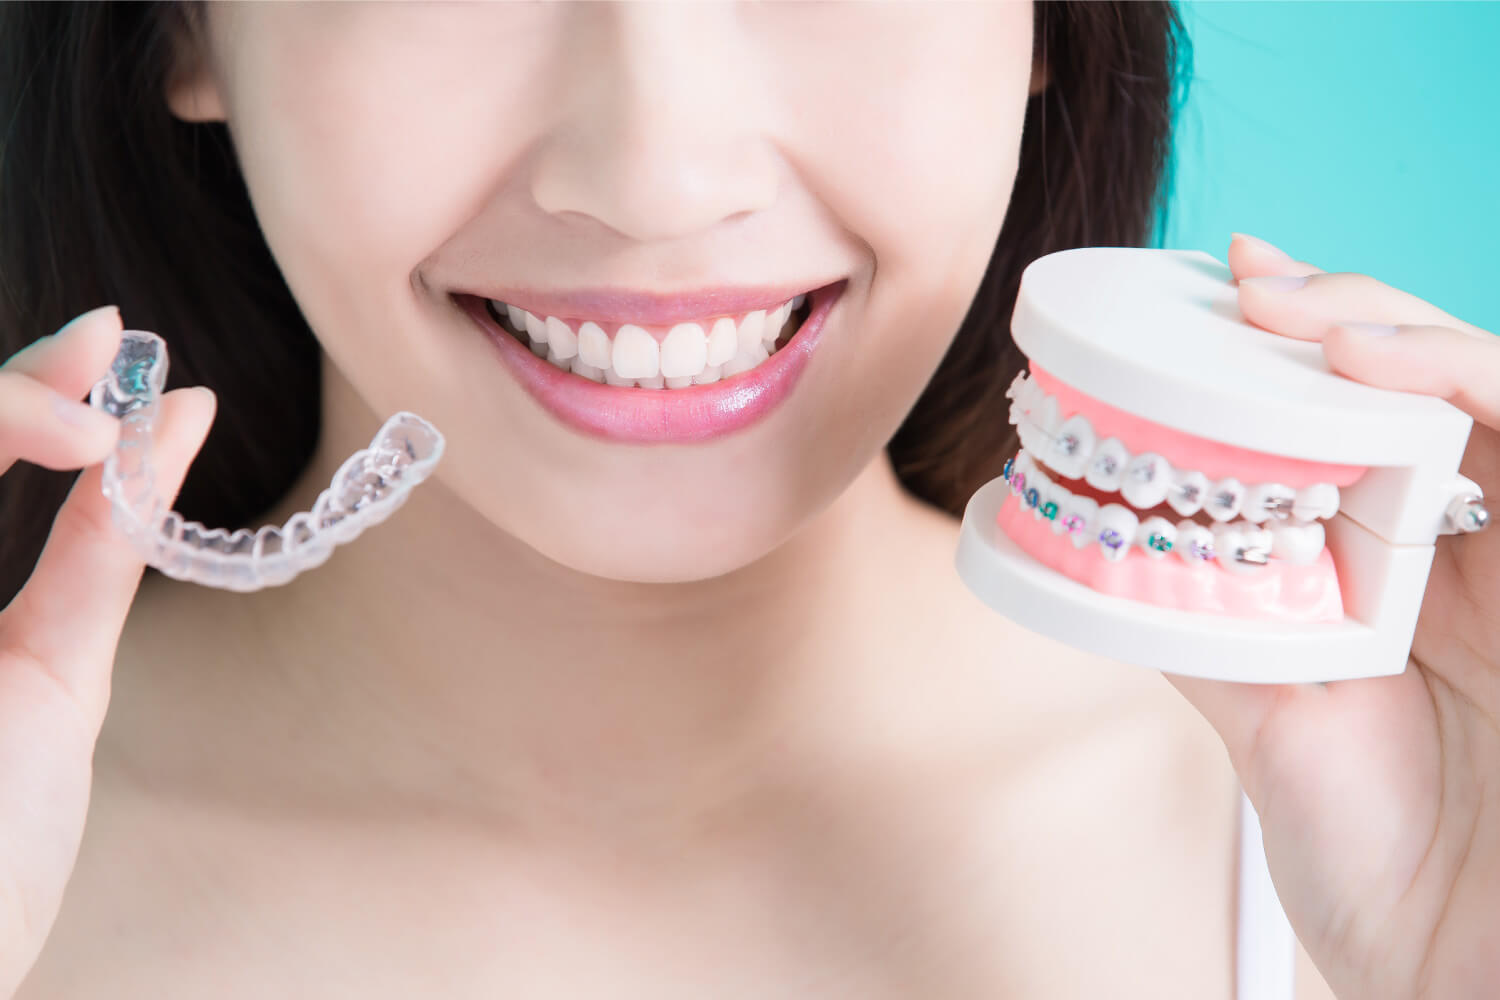 Woman holds up Invisalign clear aligners and a teeth model with braces to compare their benefits